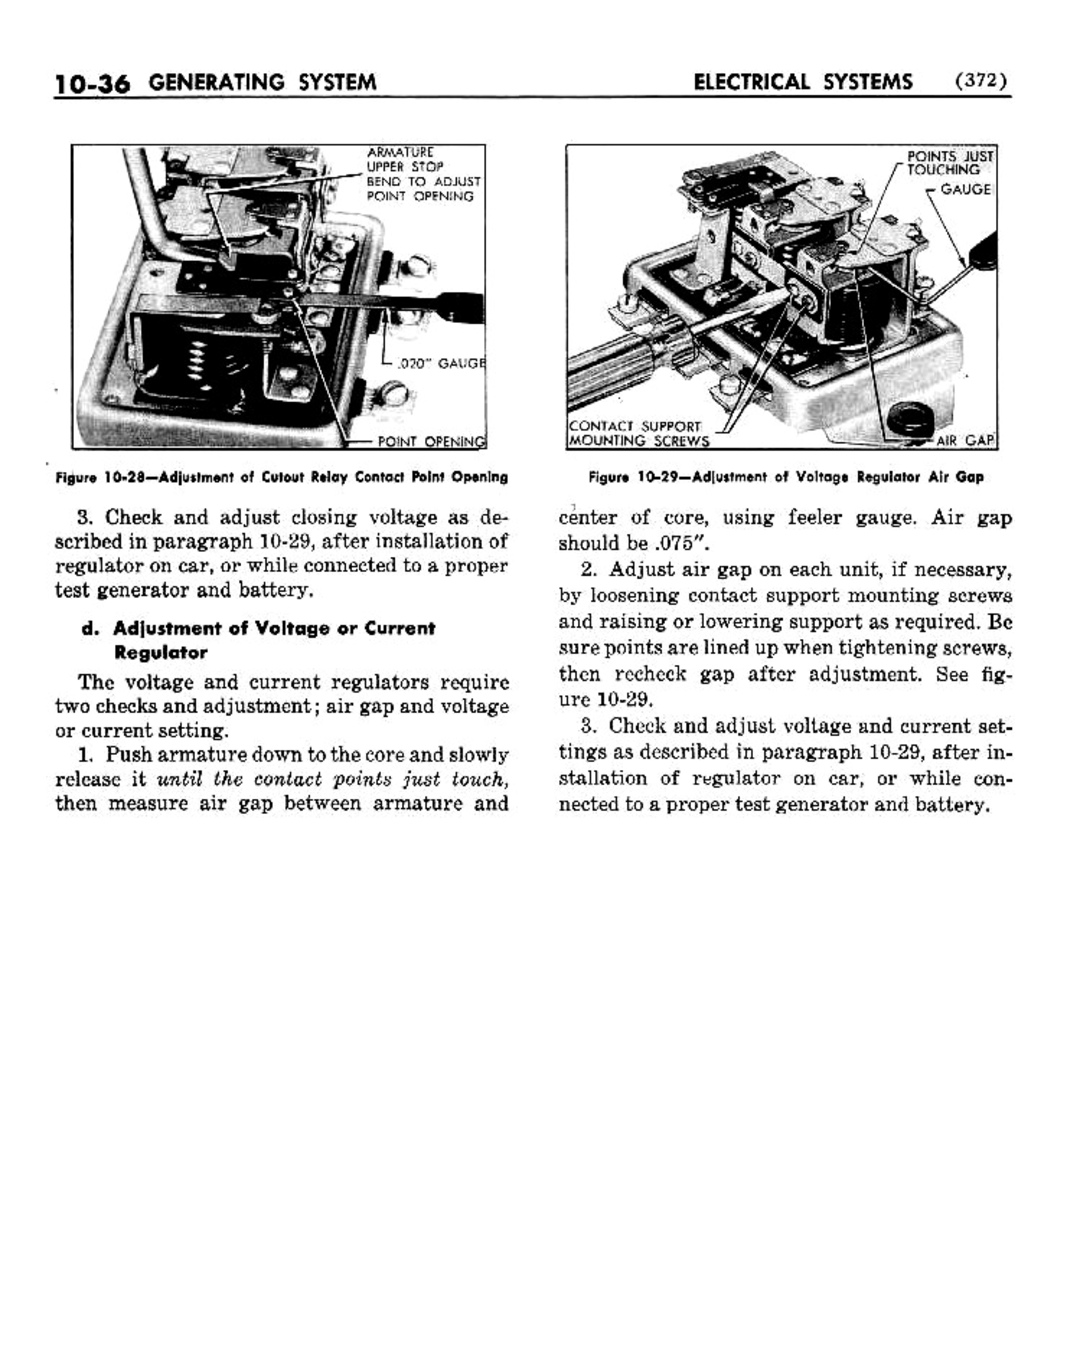 n_11 1952 Buick Shop Manual - Electrical Systems-036-036.jpg